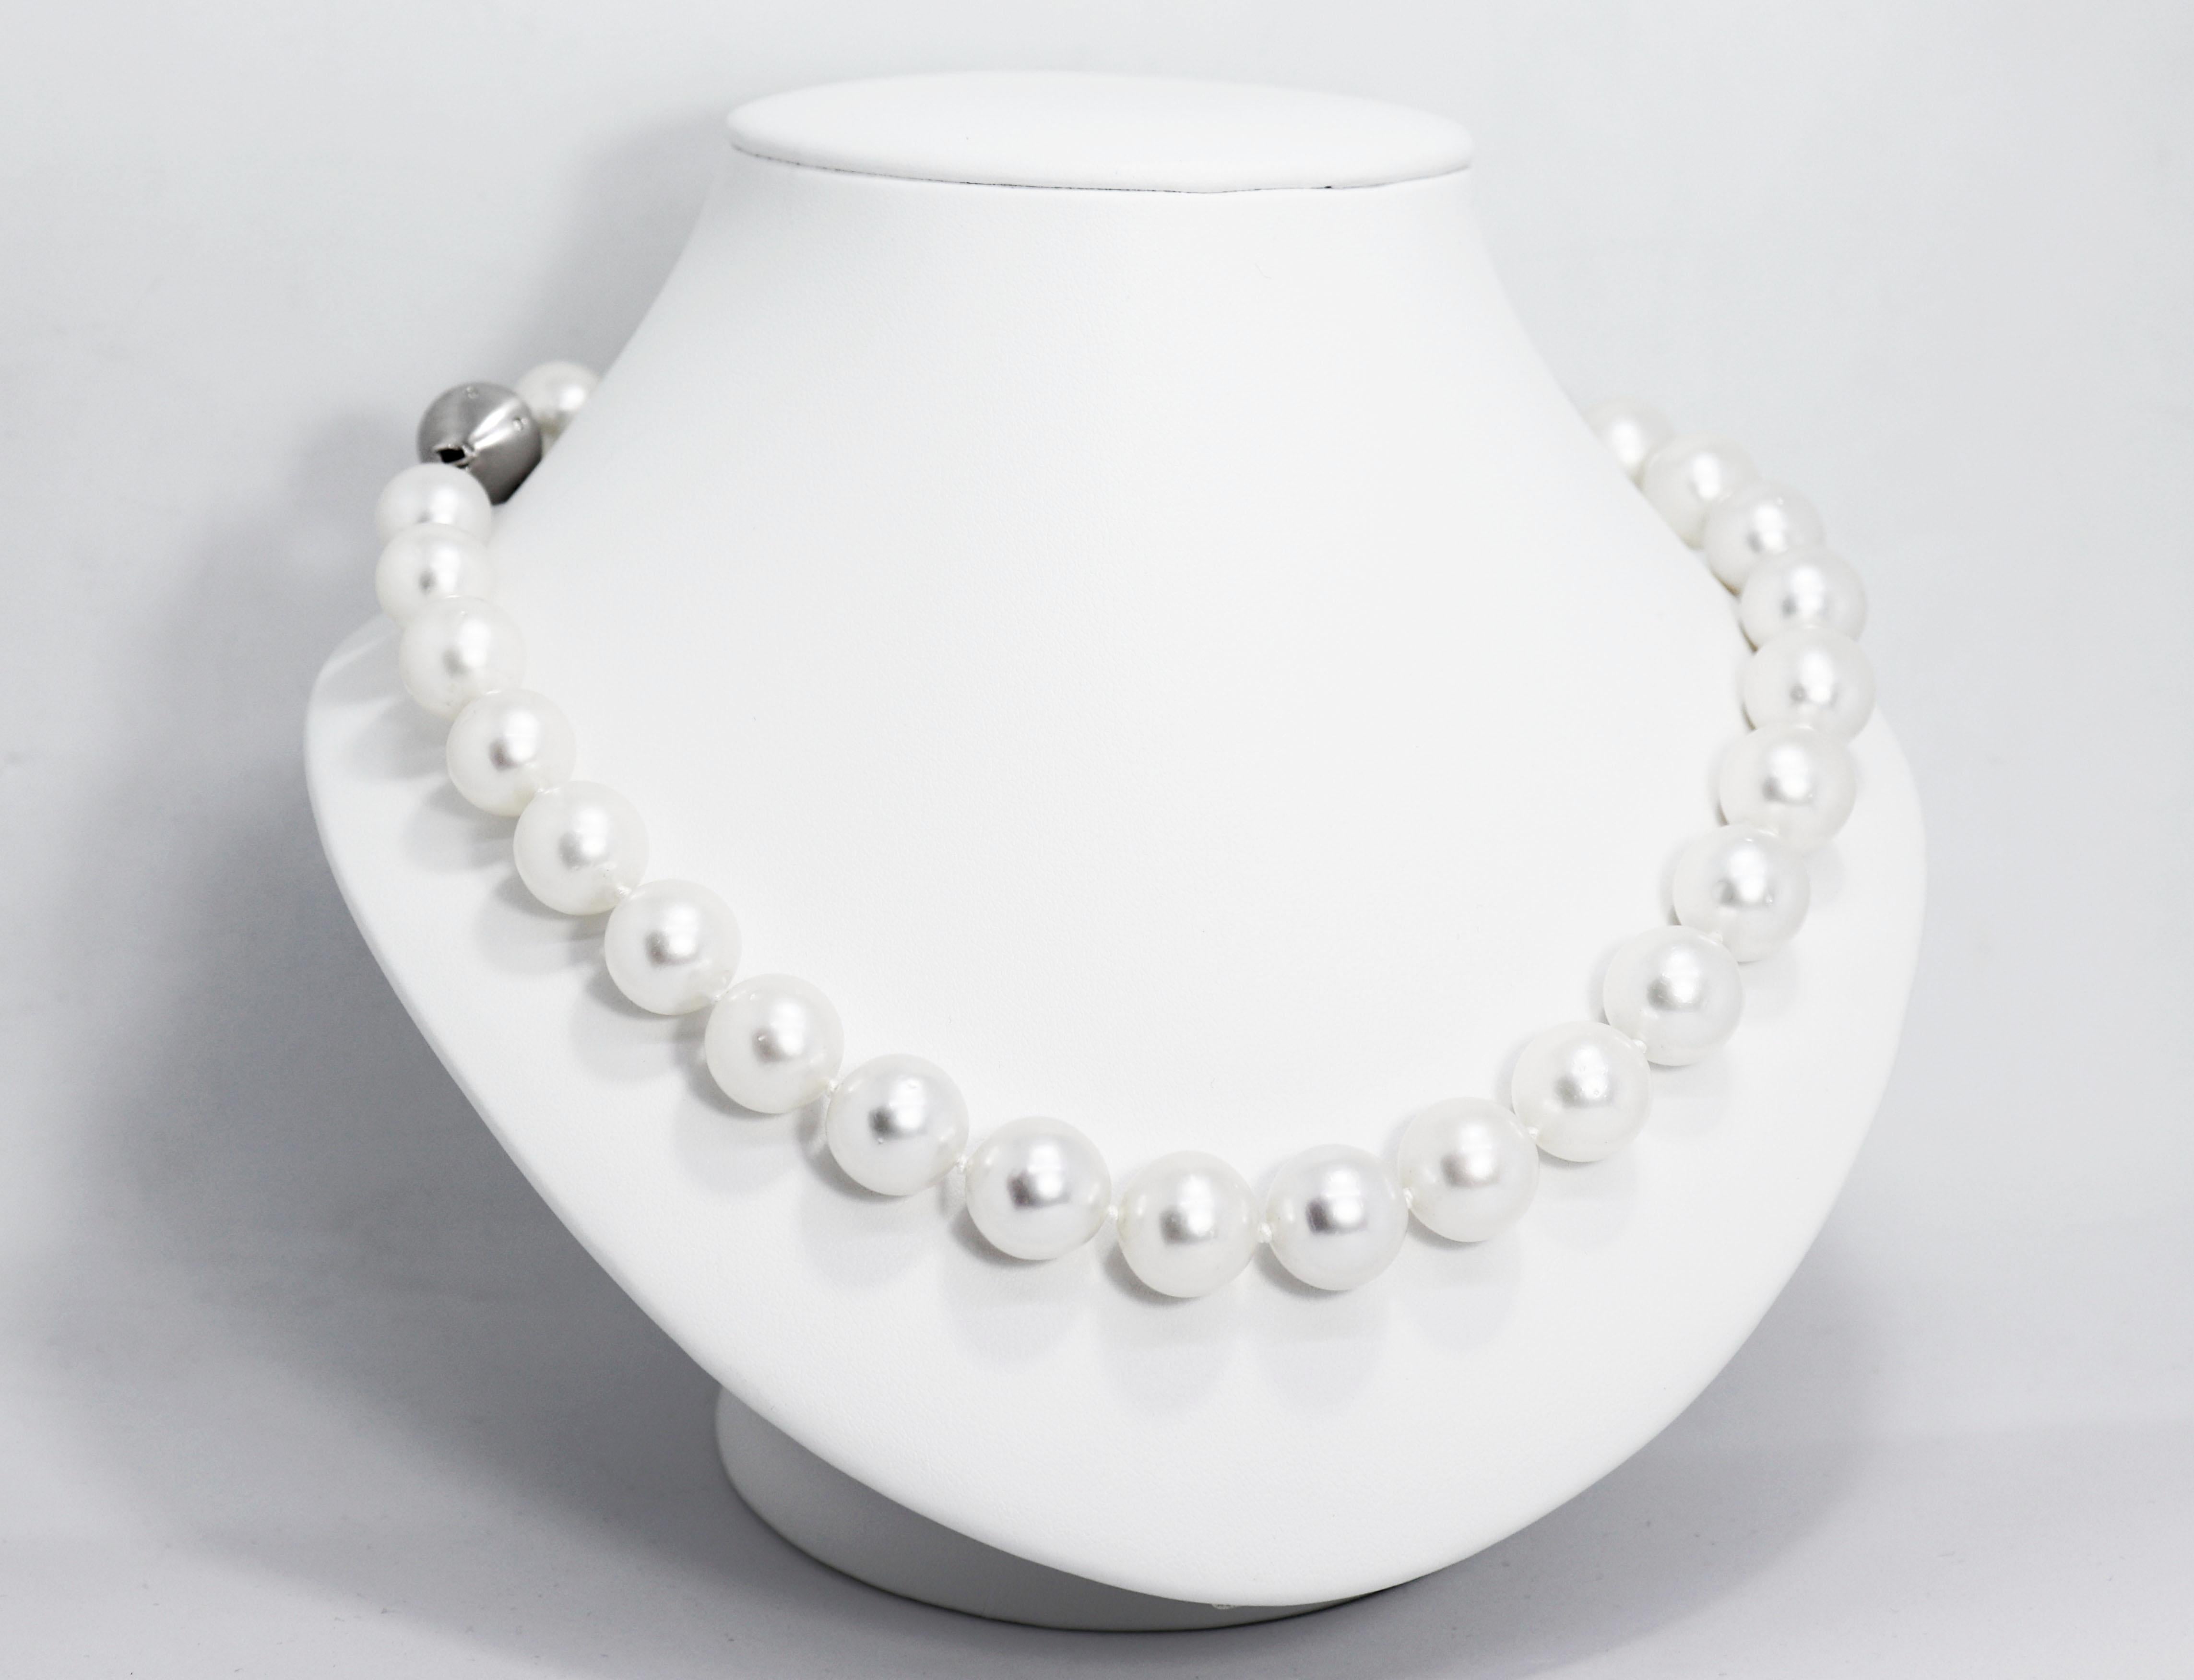 Beautiful necklace featuring 31 cultured white South Sea pearls graduating from 13.9mm - 12mm in diameter finished with an 18 carat white gold matte finish clap set with 12 round brilliant cut diamonds weighing approximately 0.18ct. The necklace